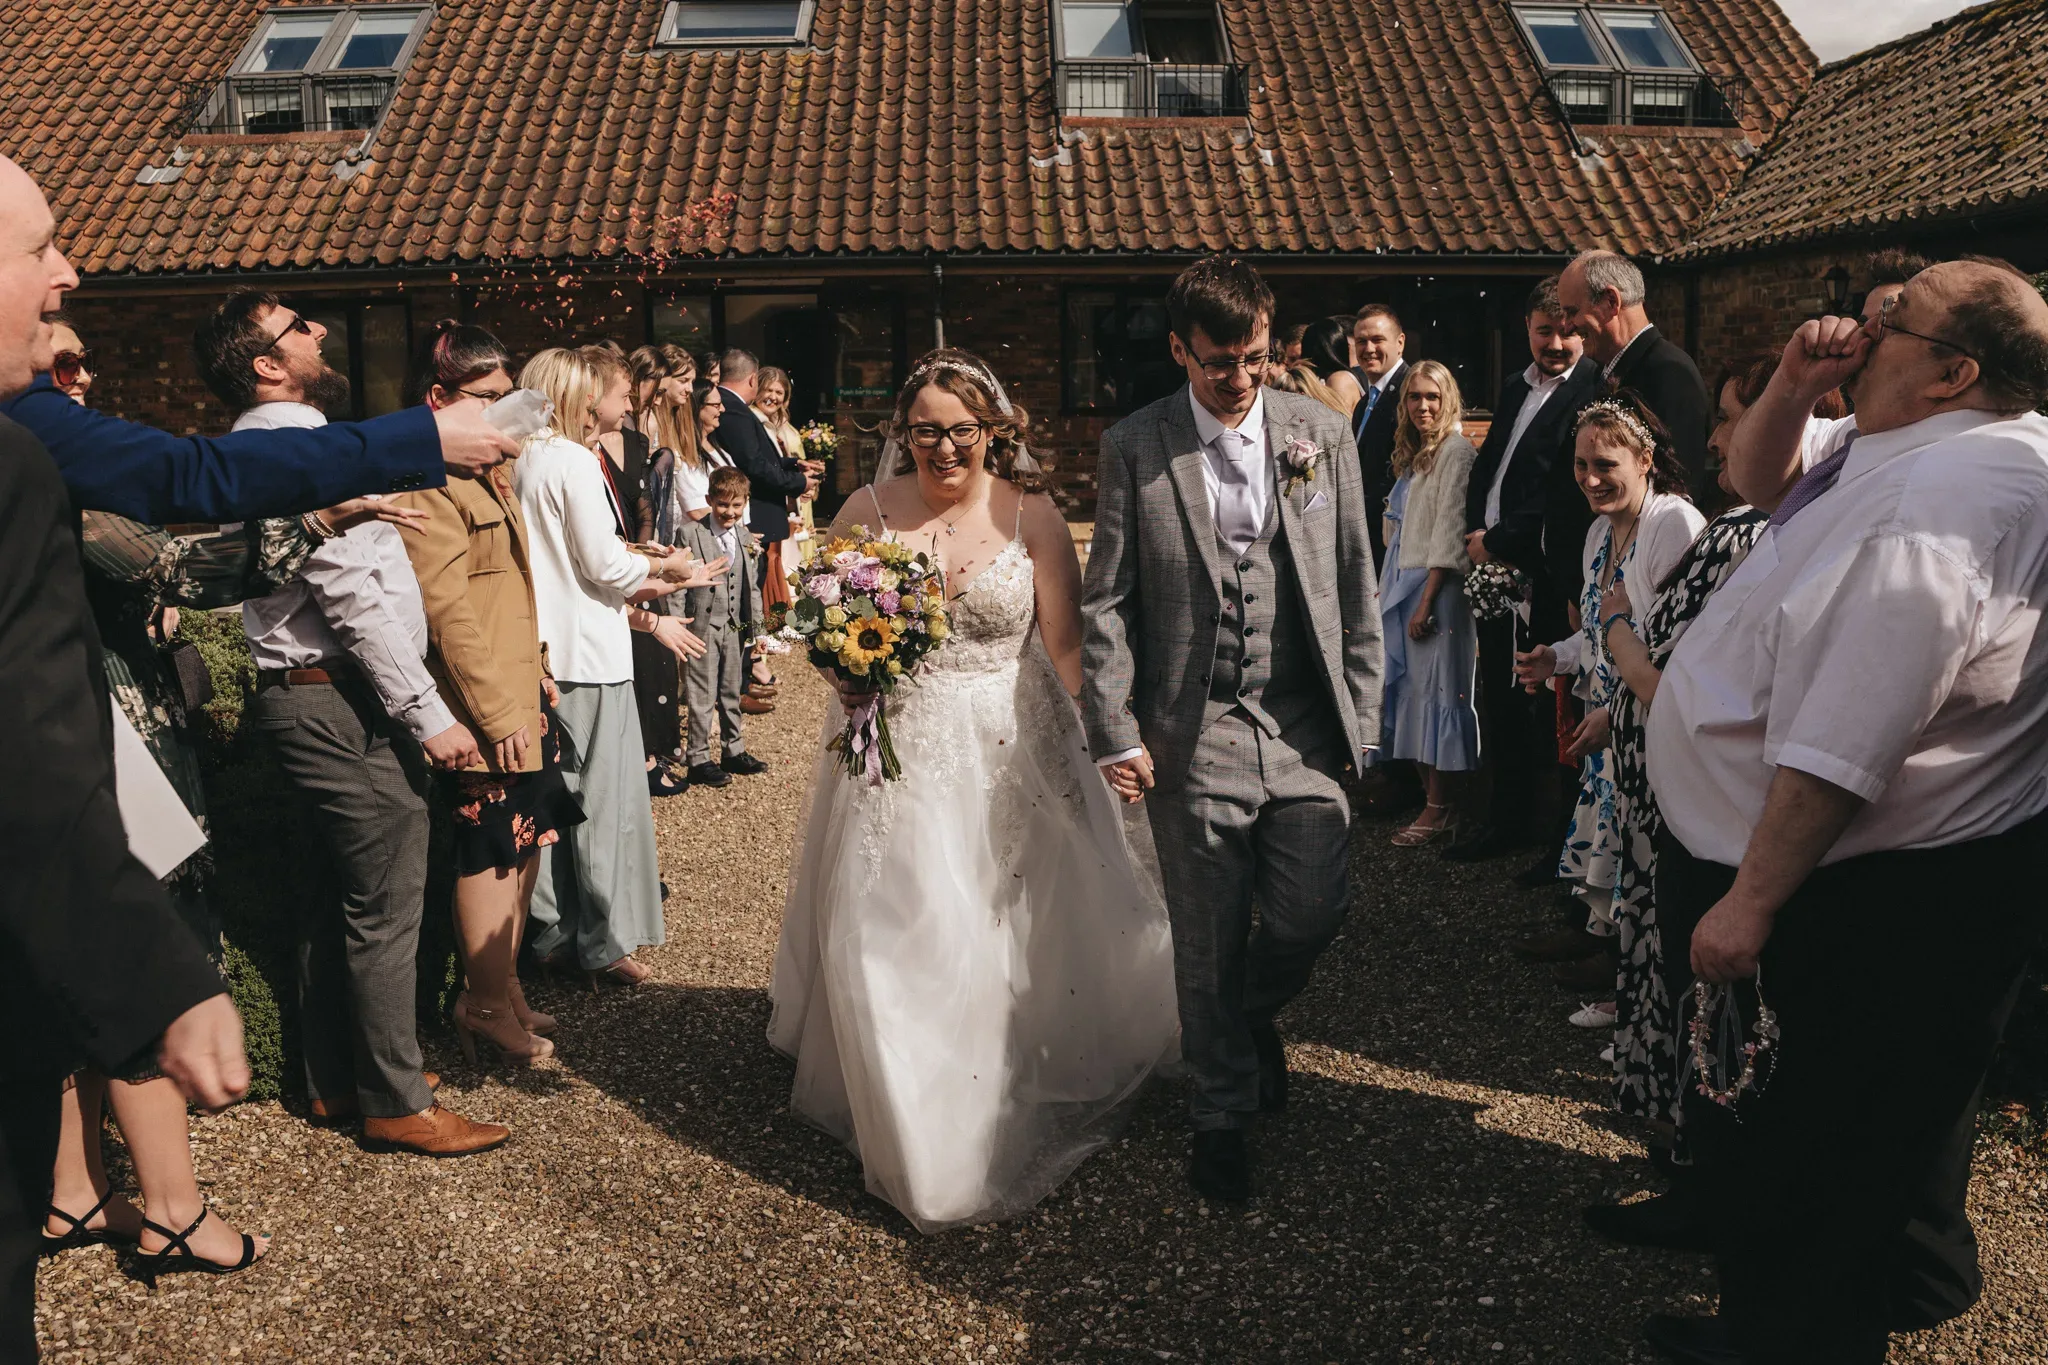 A newlywed couple walks hand-in-hand as guests line up on either side, throwing confetti and cheering to celebrate their marriage, with a rustic brick venue in the background.